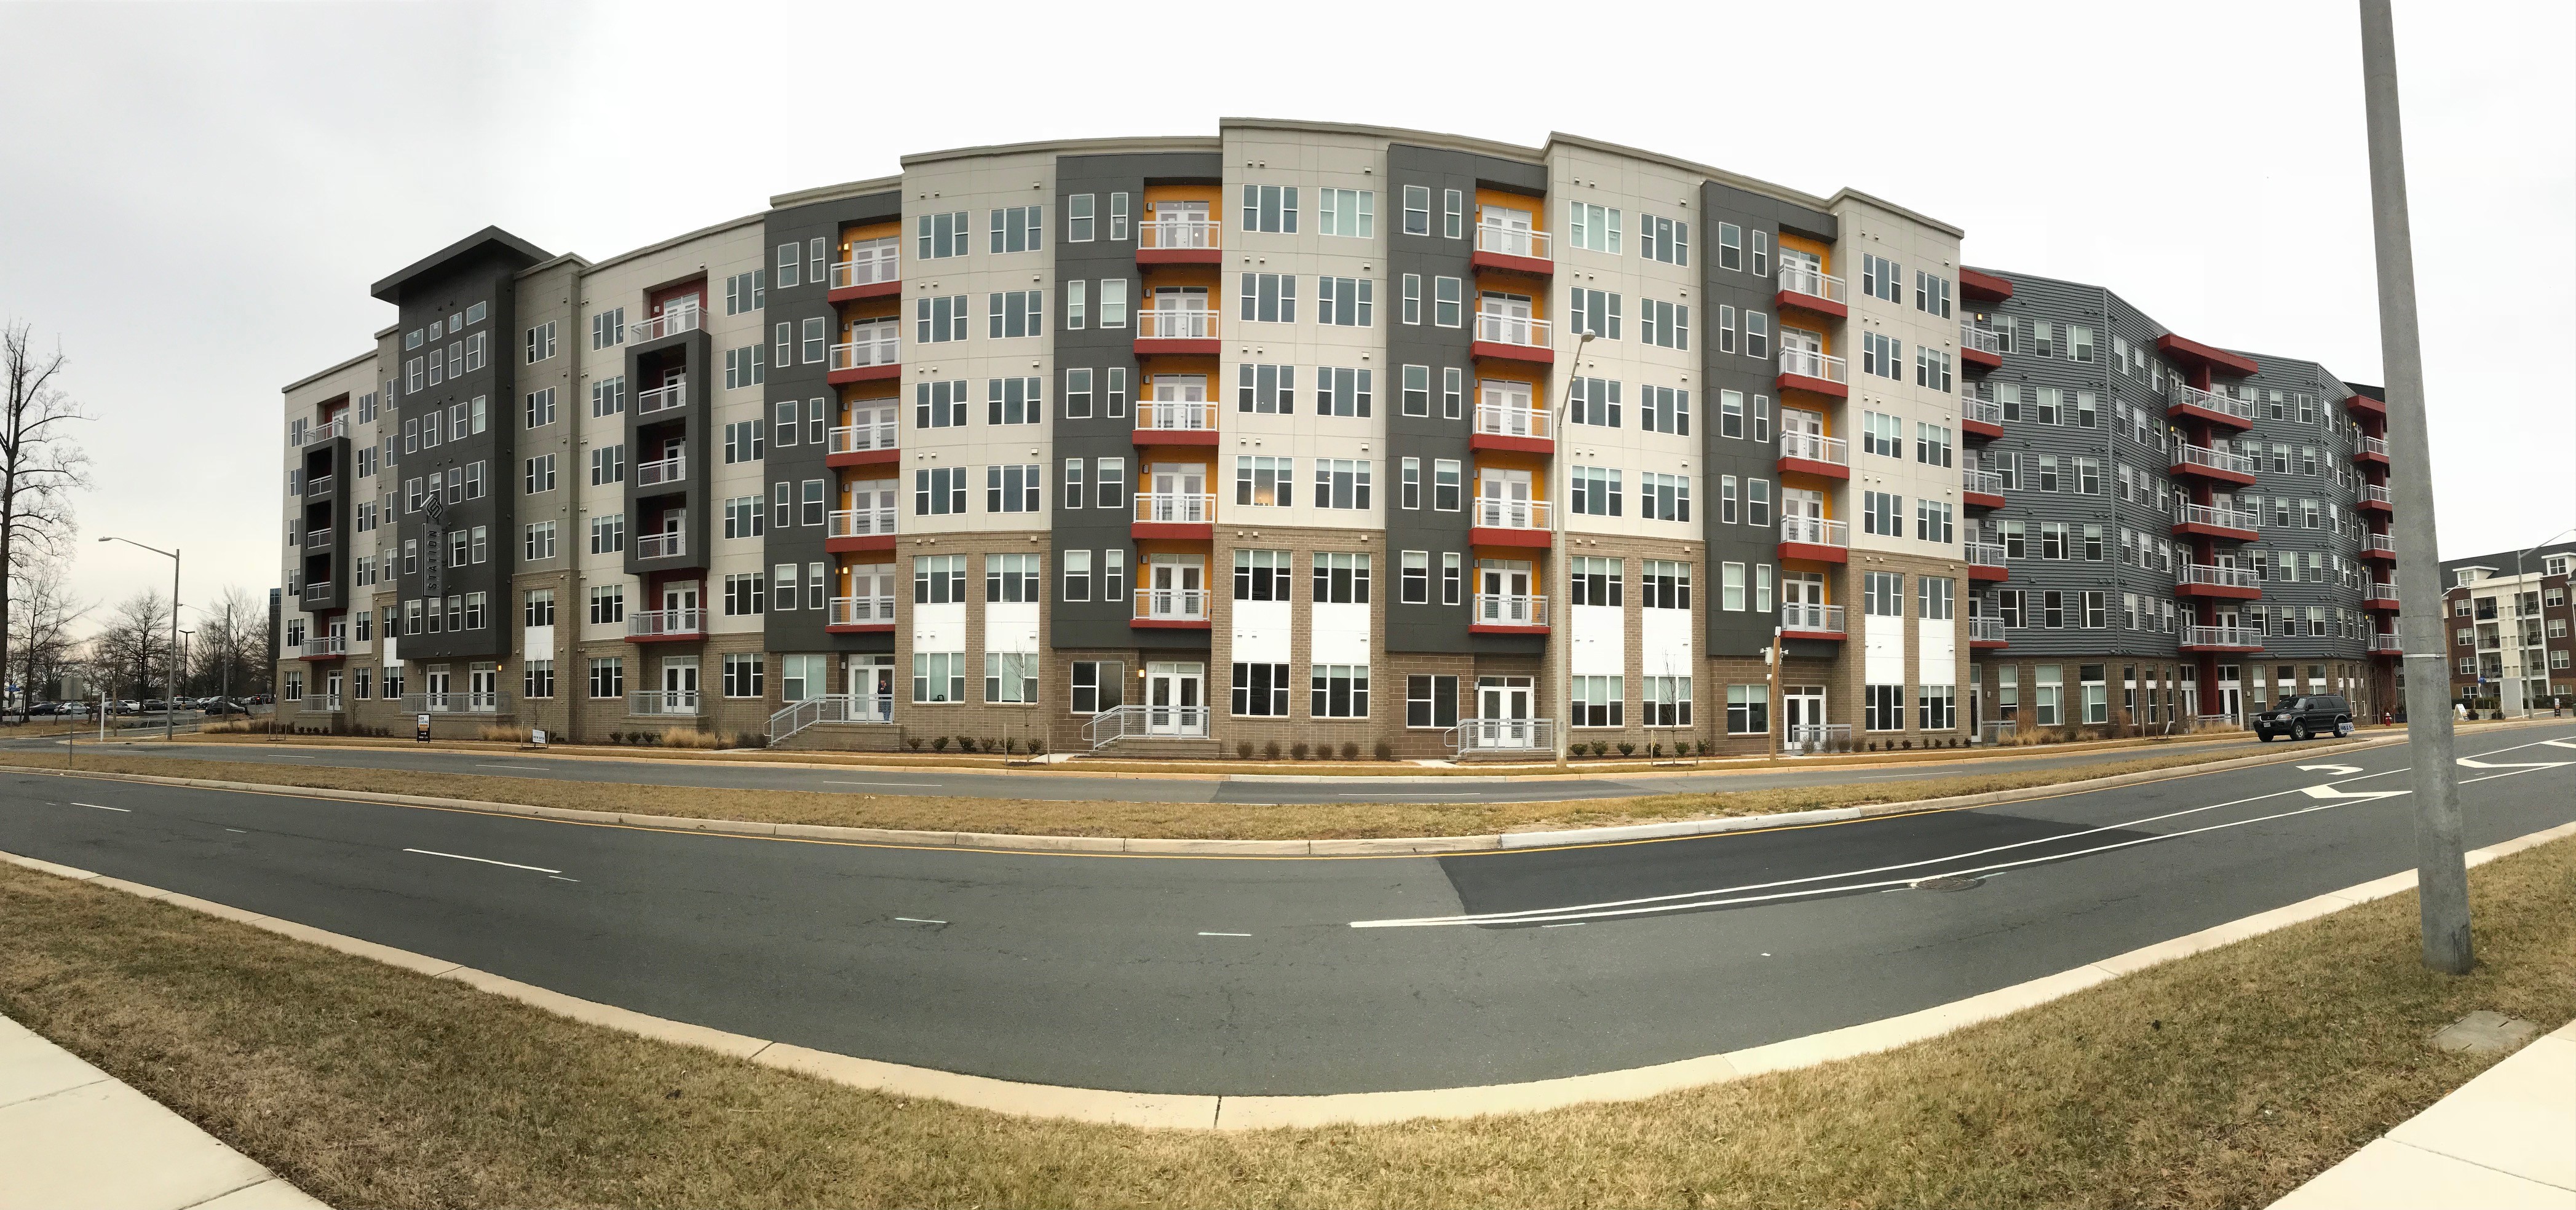 Northeast Construction | Dulles Station Apartment Building Completed ...